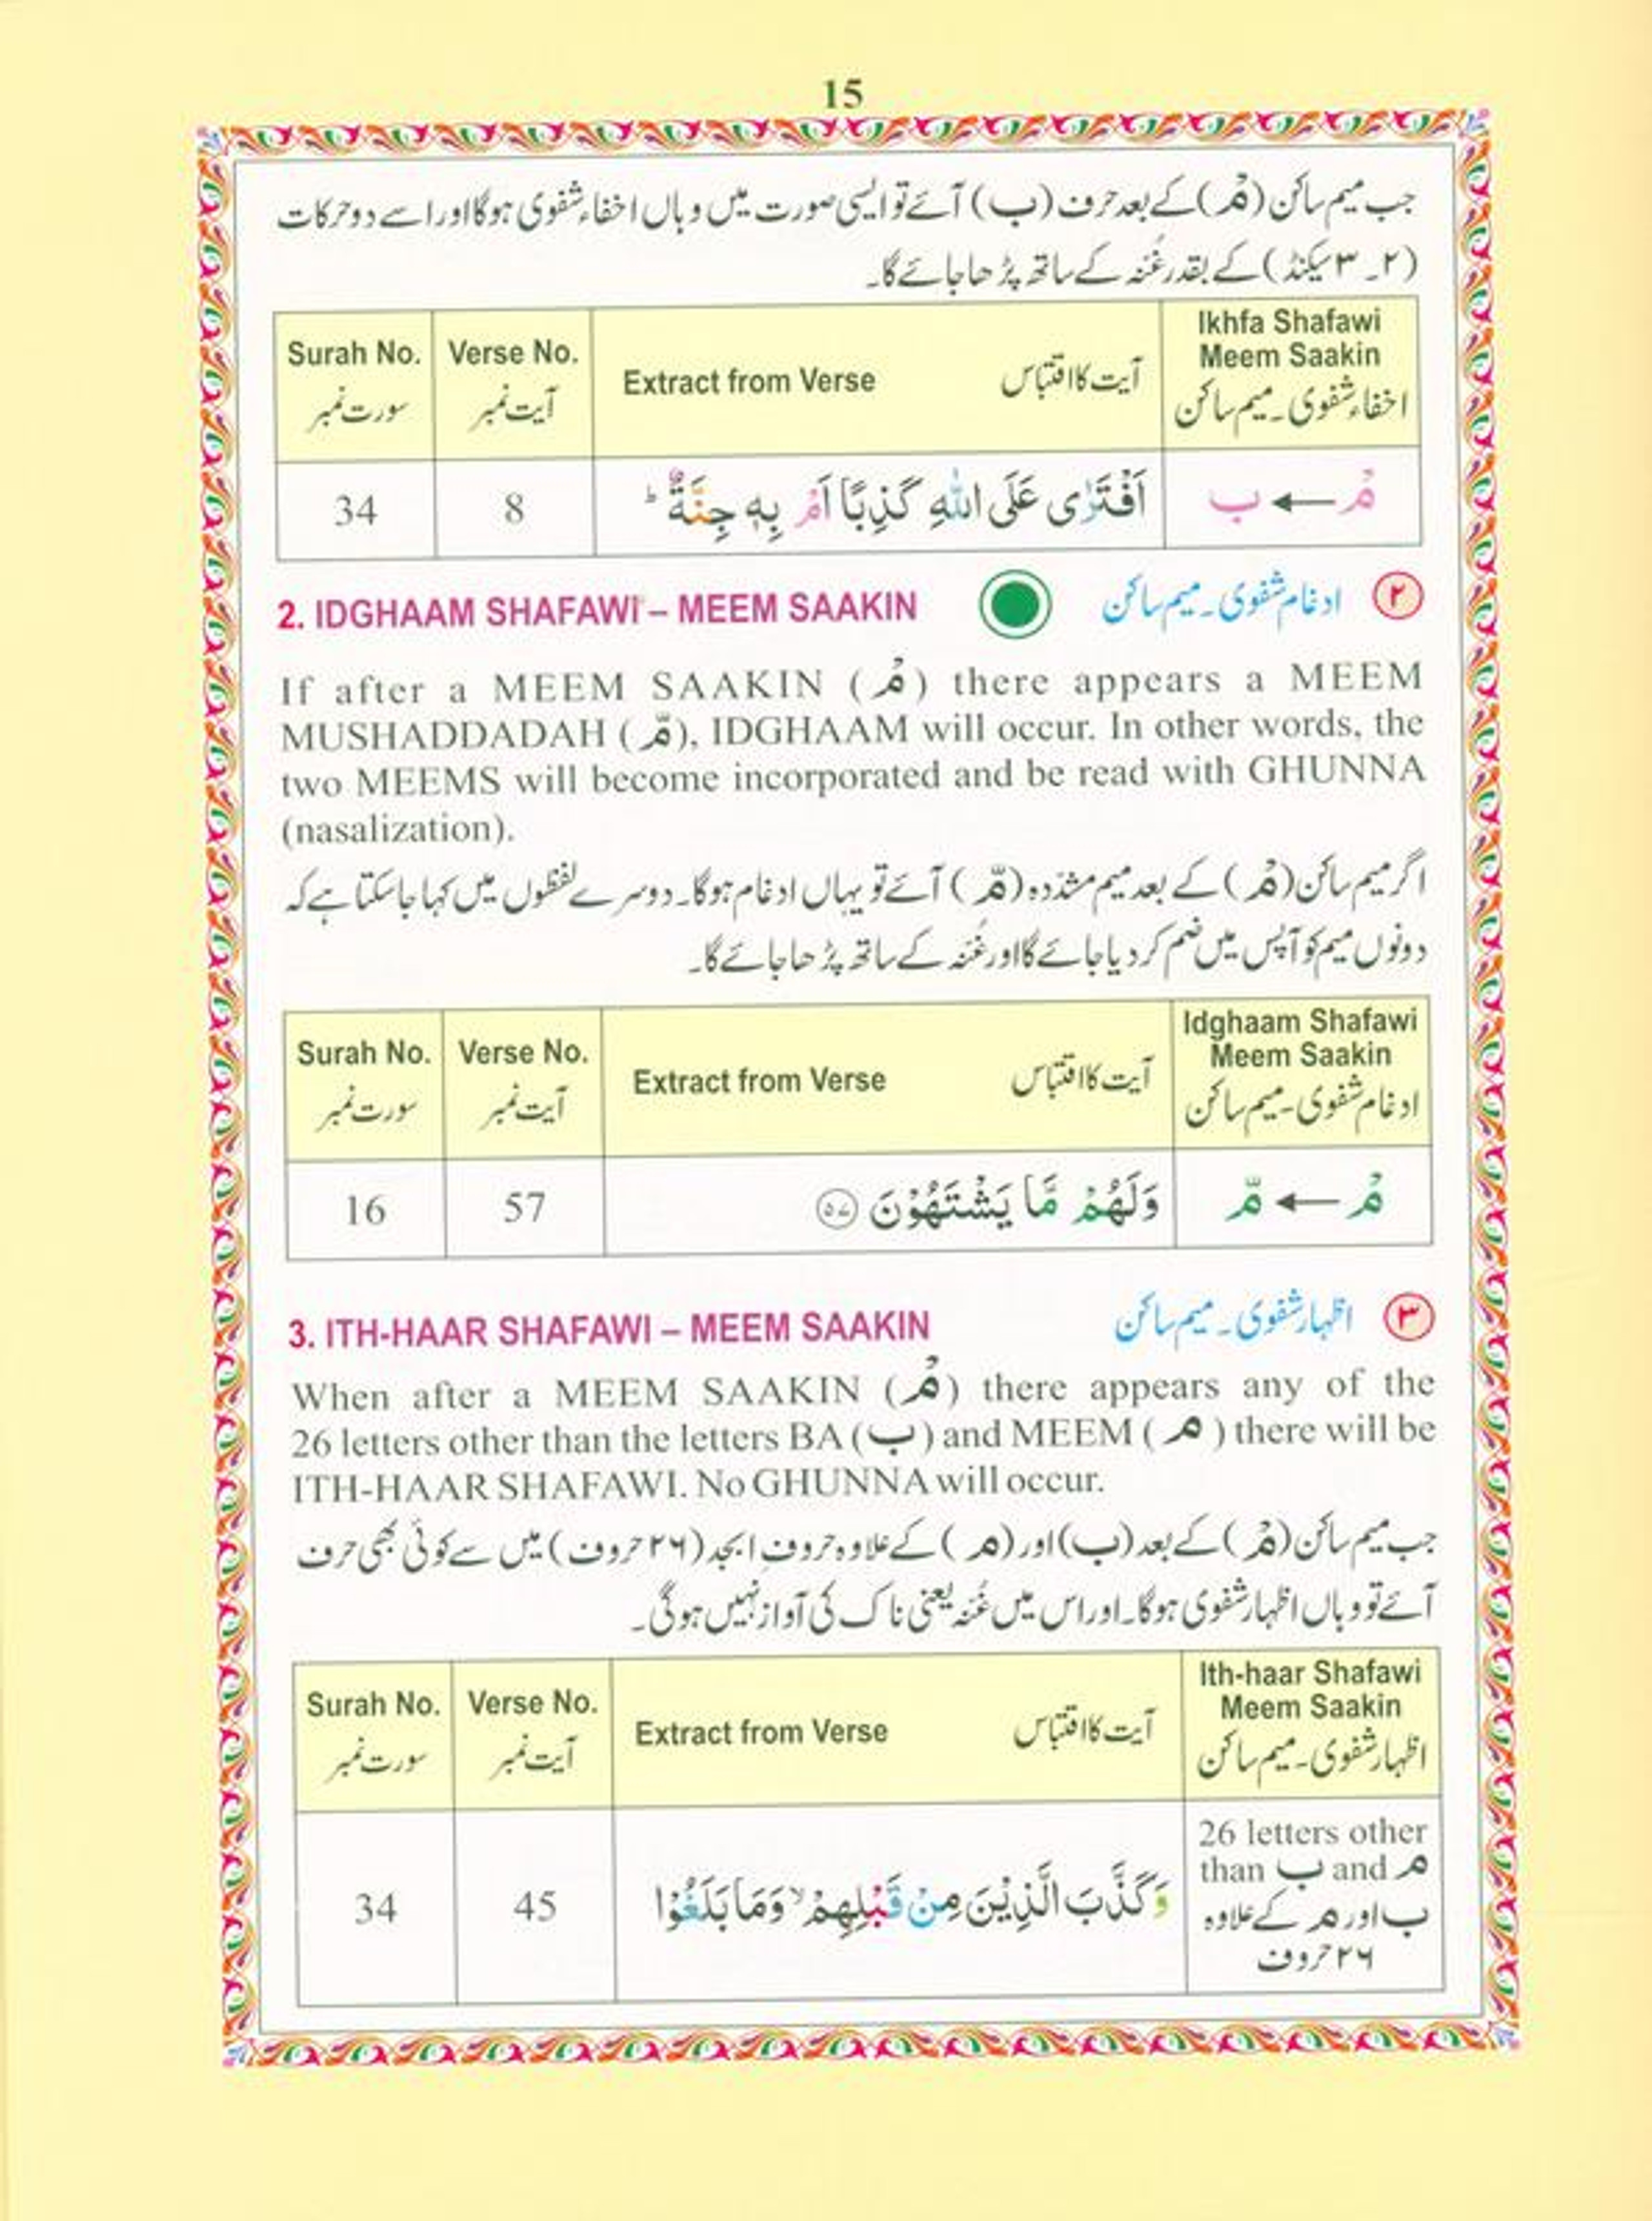 the holy quran colour coded tajweed rules pdf